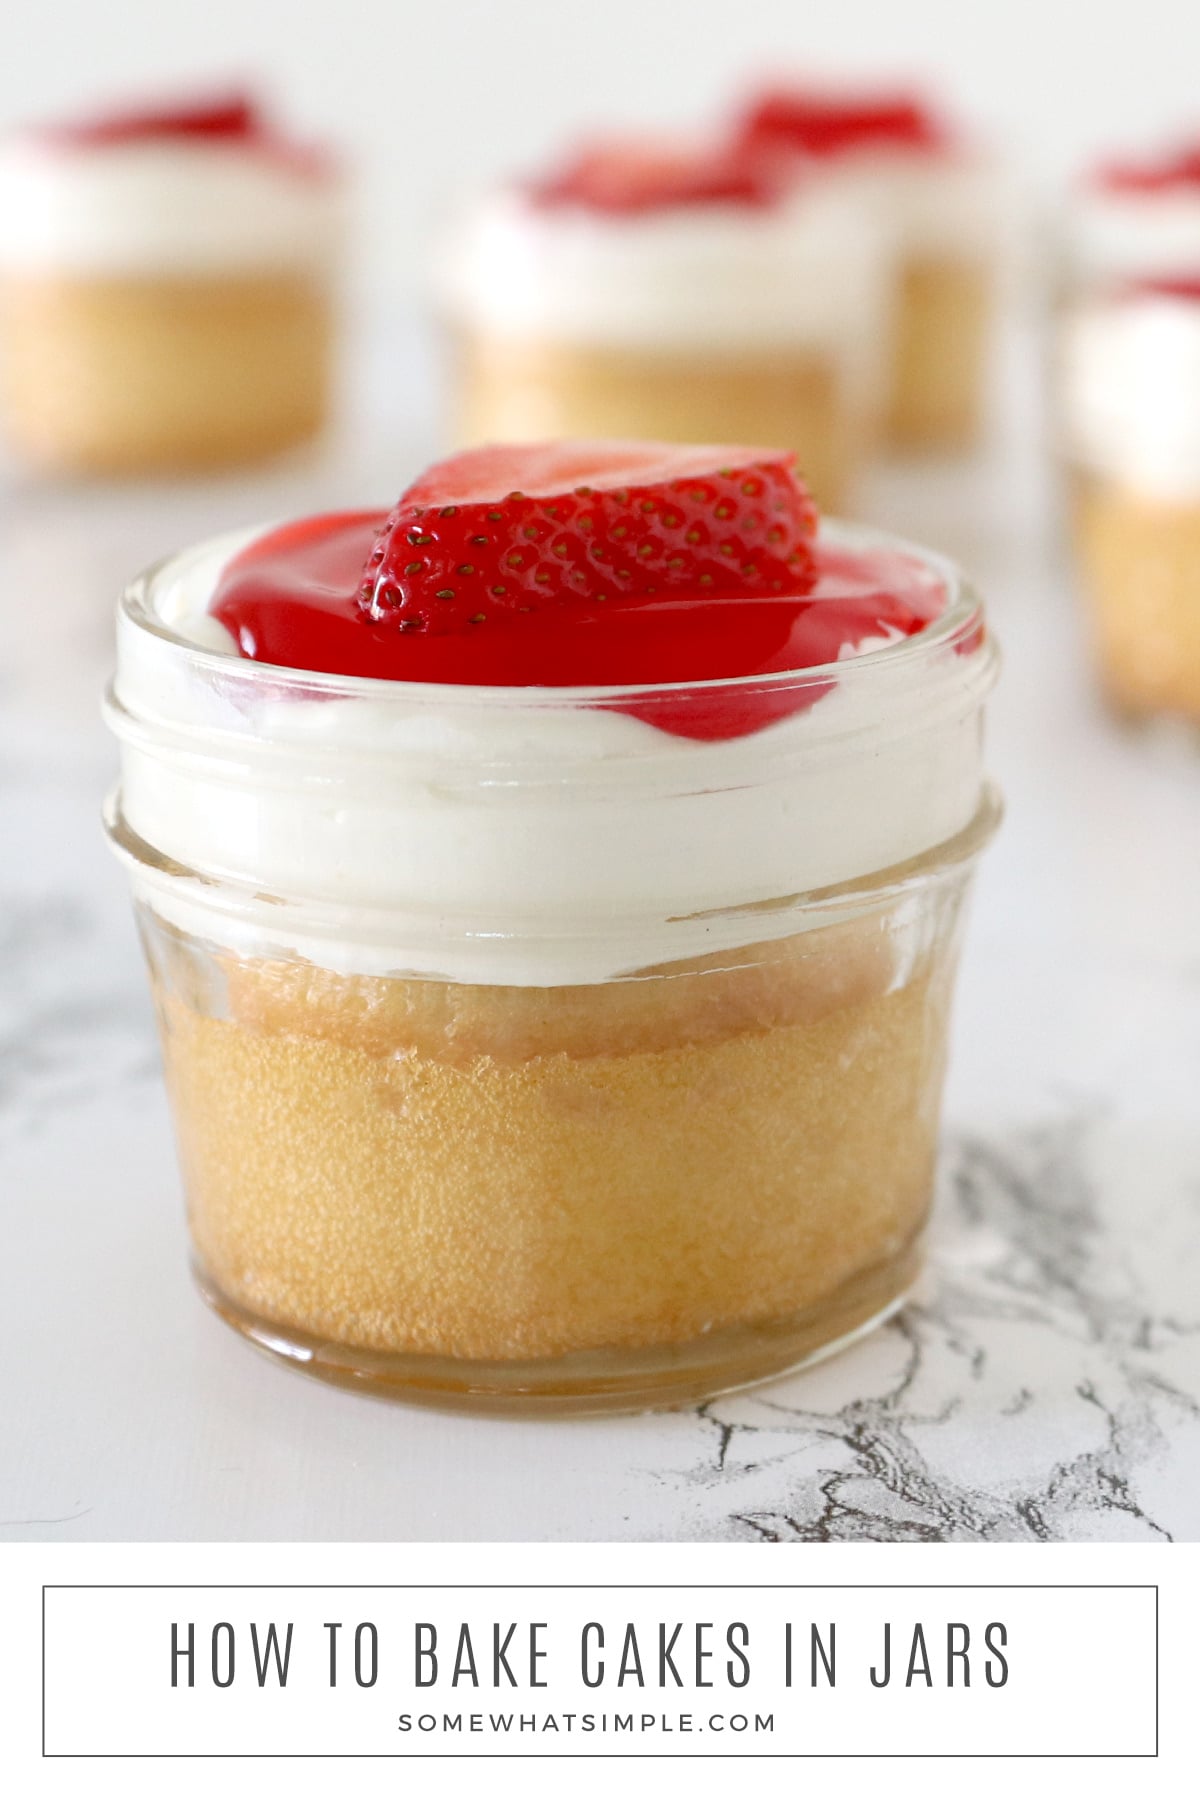 White cake, cream cheese filling, and fresh strawberries prepared in individual cups. Strawberry Cake in a Jar is both tasty and beautiful! via @somewhatsimple